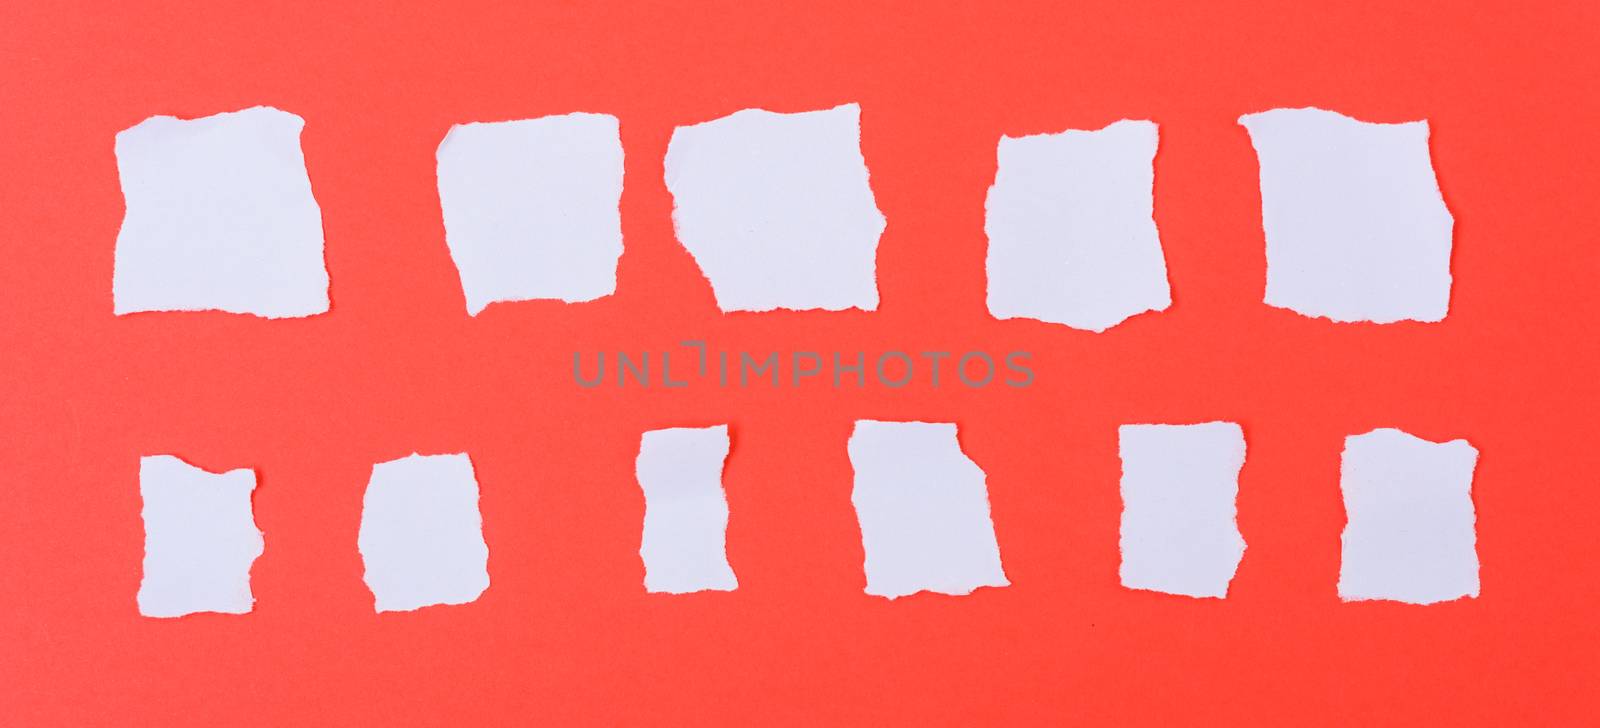 White paper torn into words on a red background